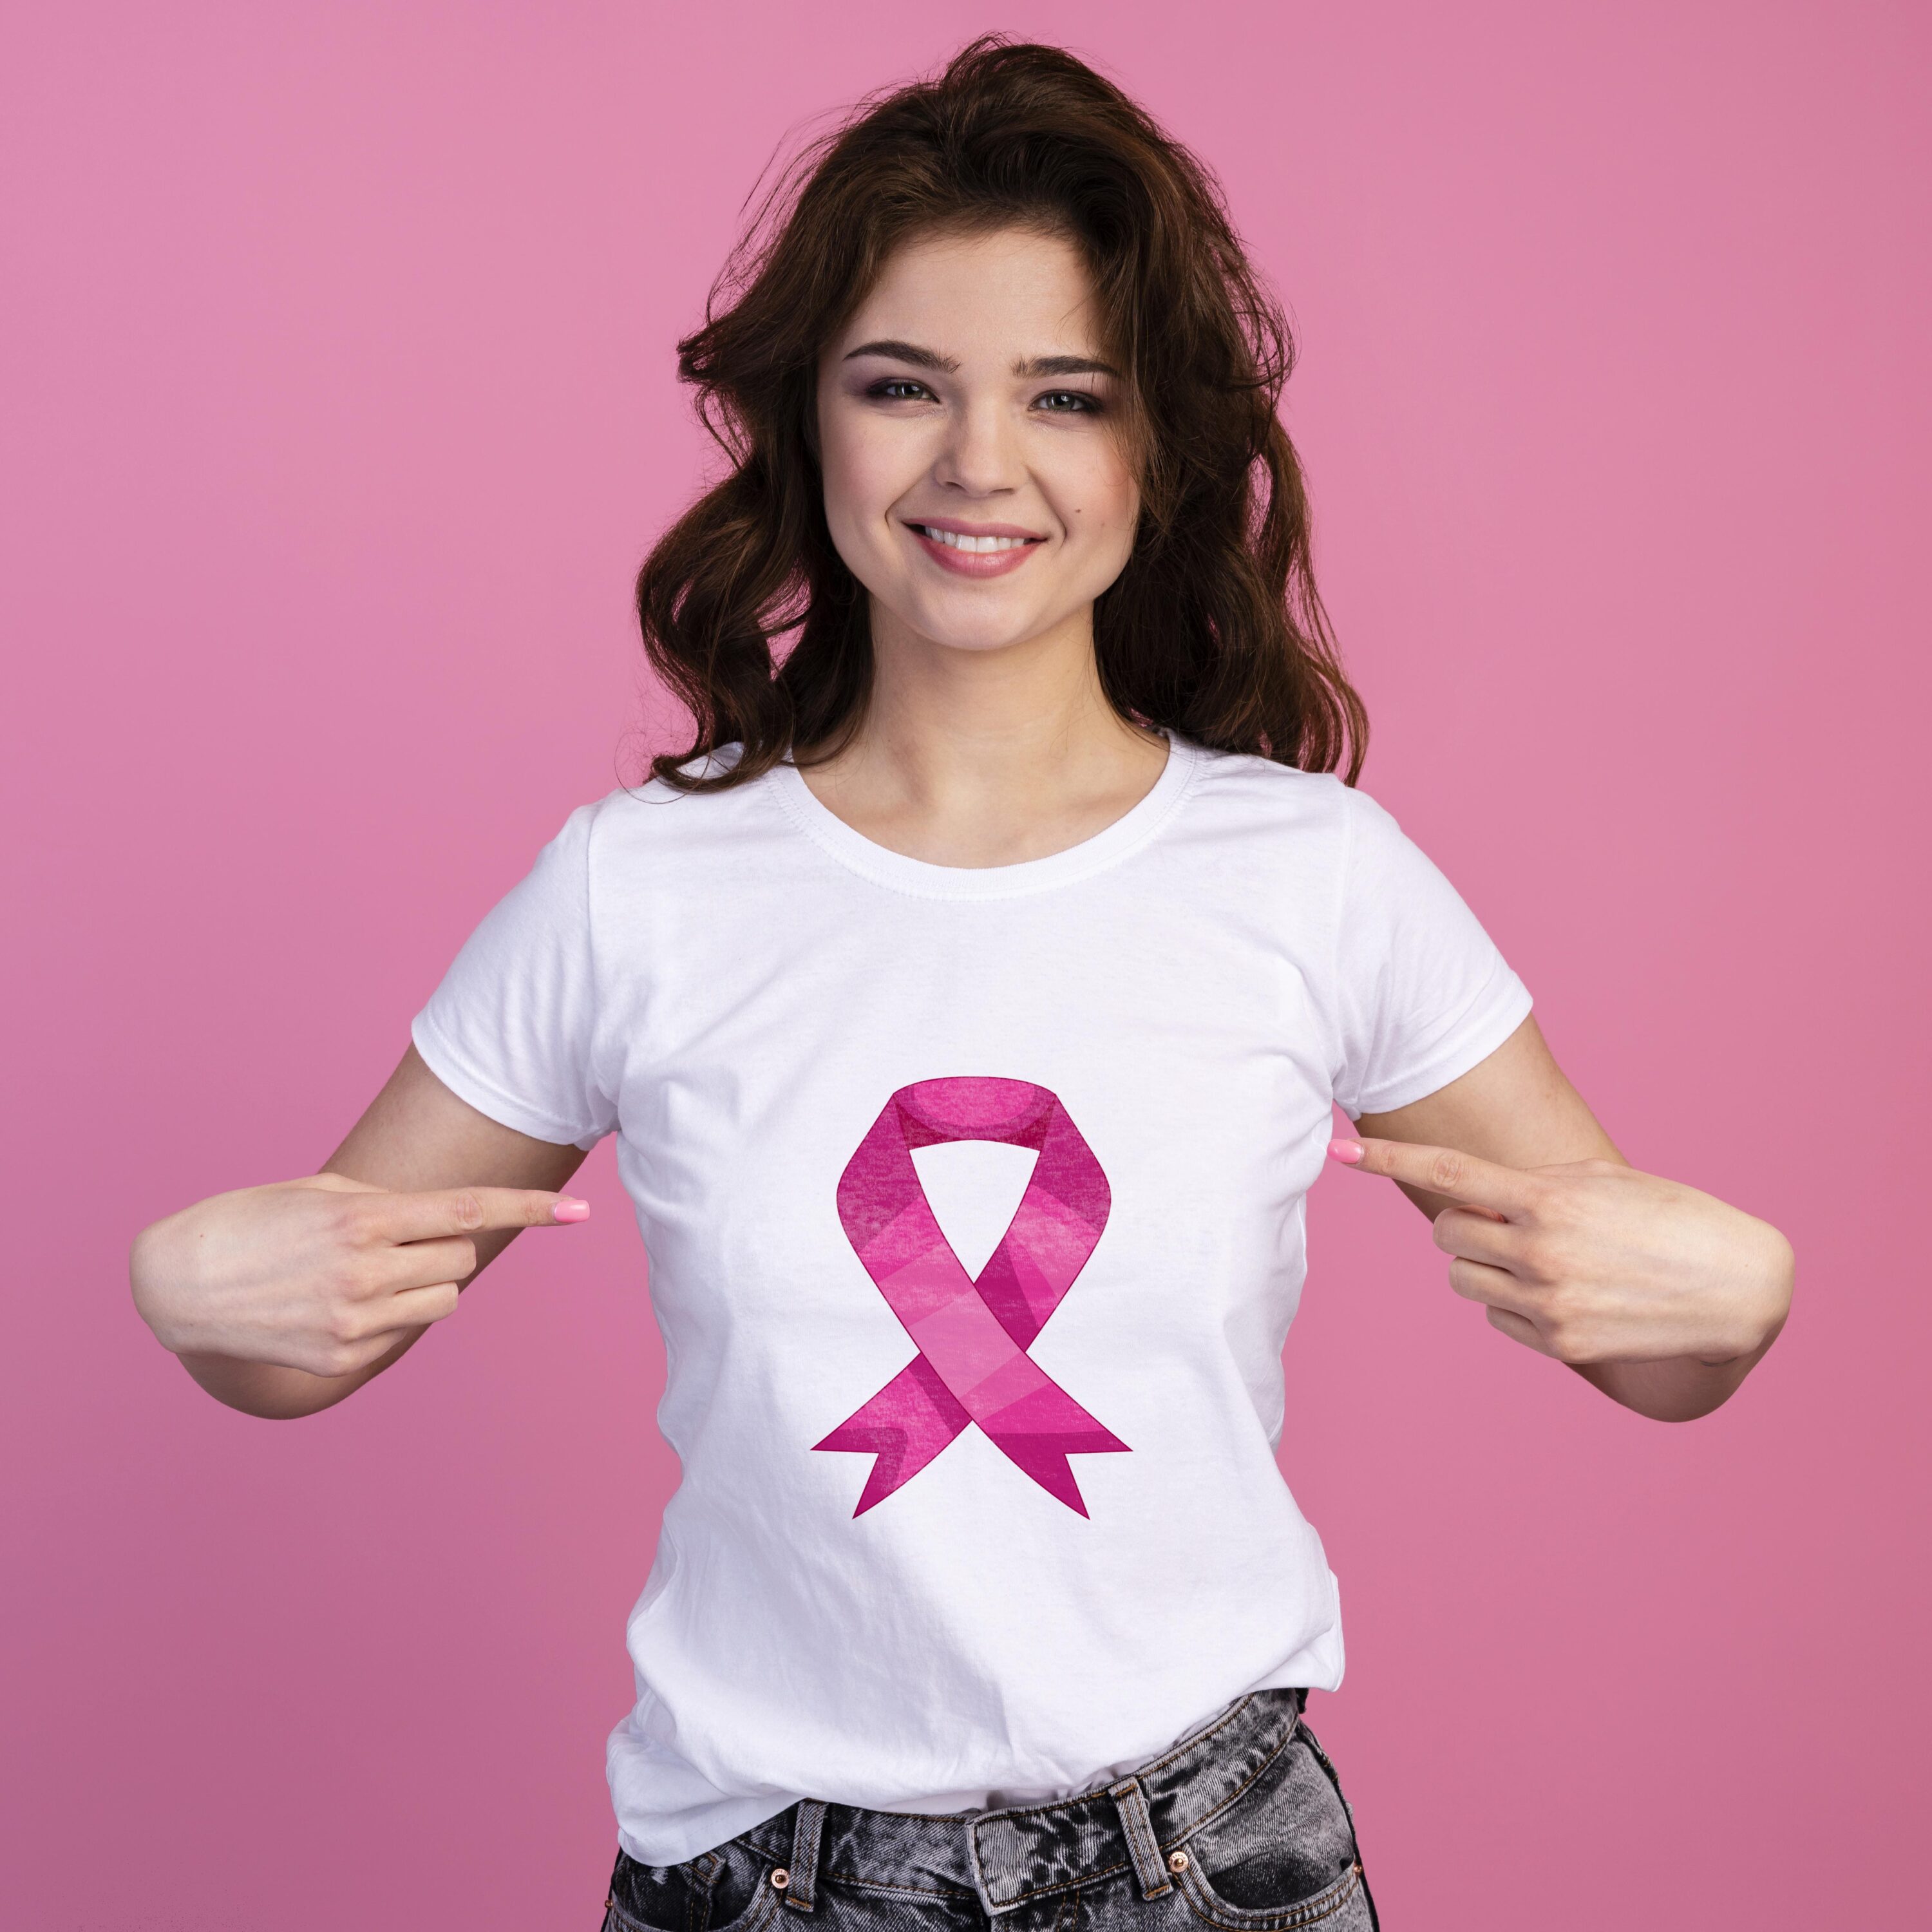 Small accurate breast cancer ribbon.